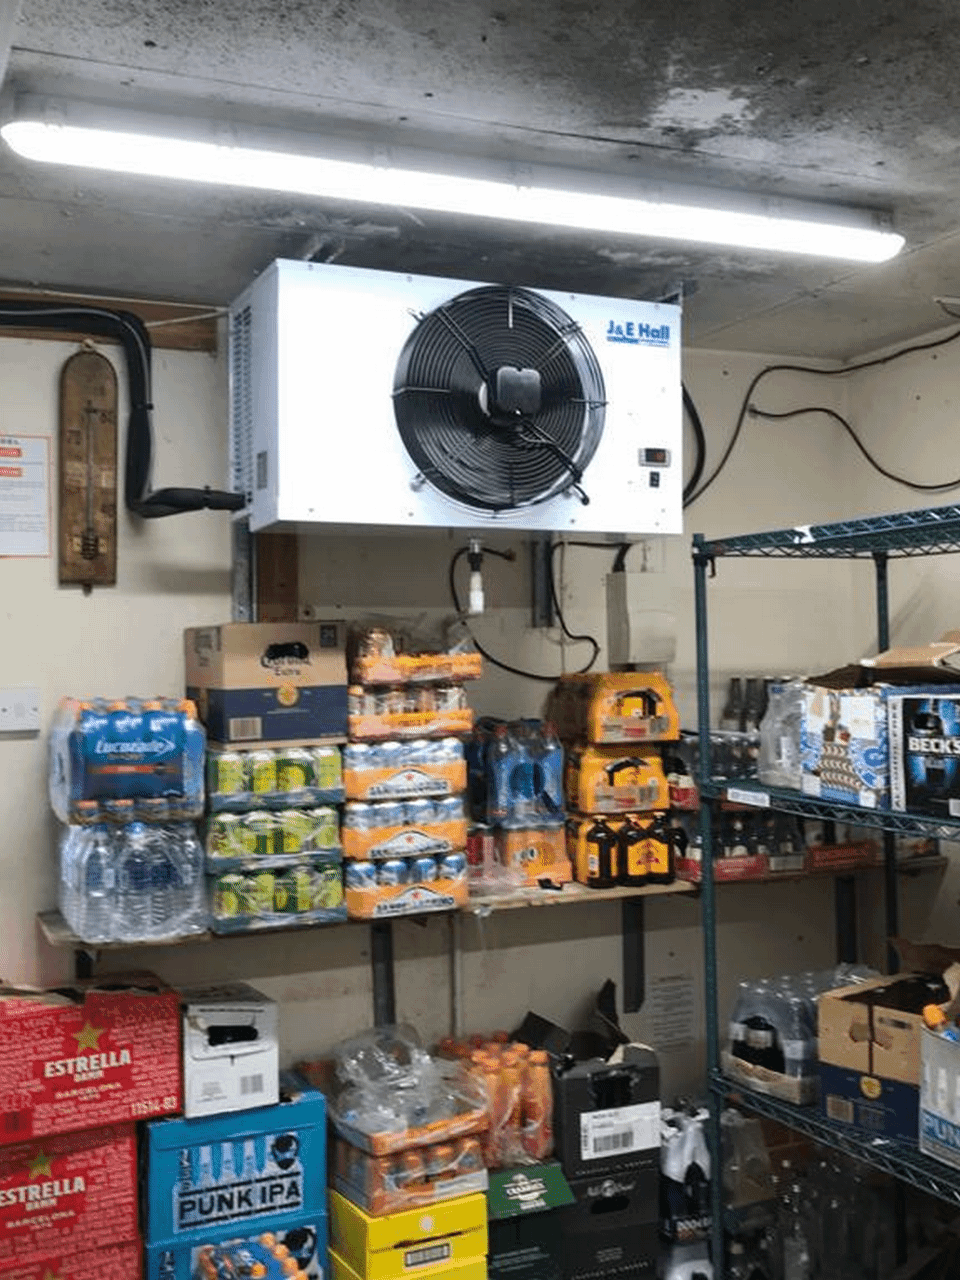 ADK NEW P2 - Air Conditioning & Refrigeration Specialists - ADK Kooling